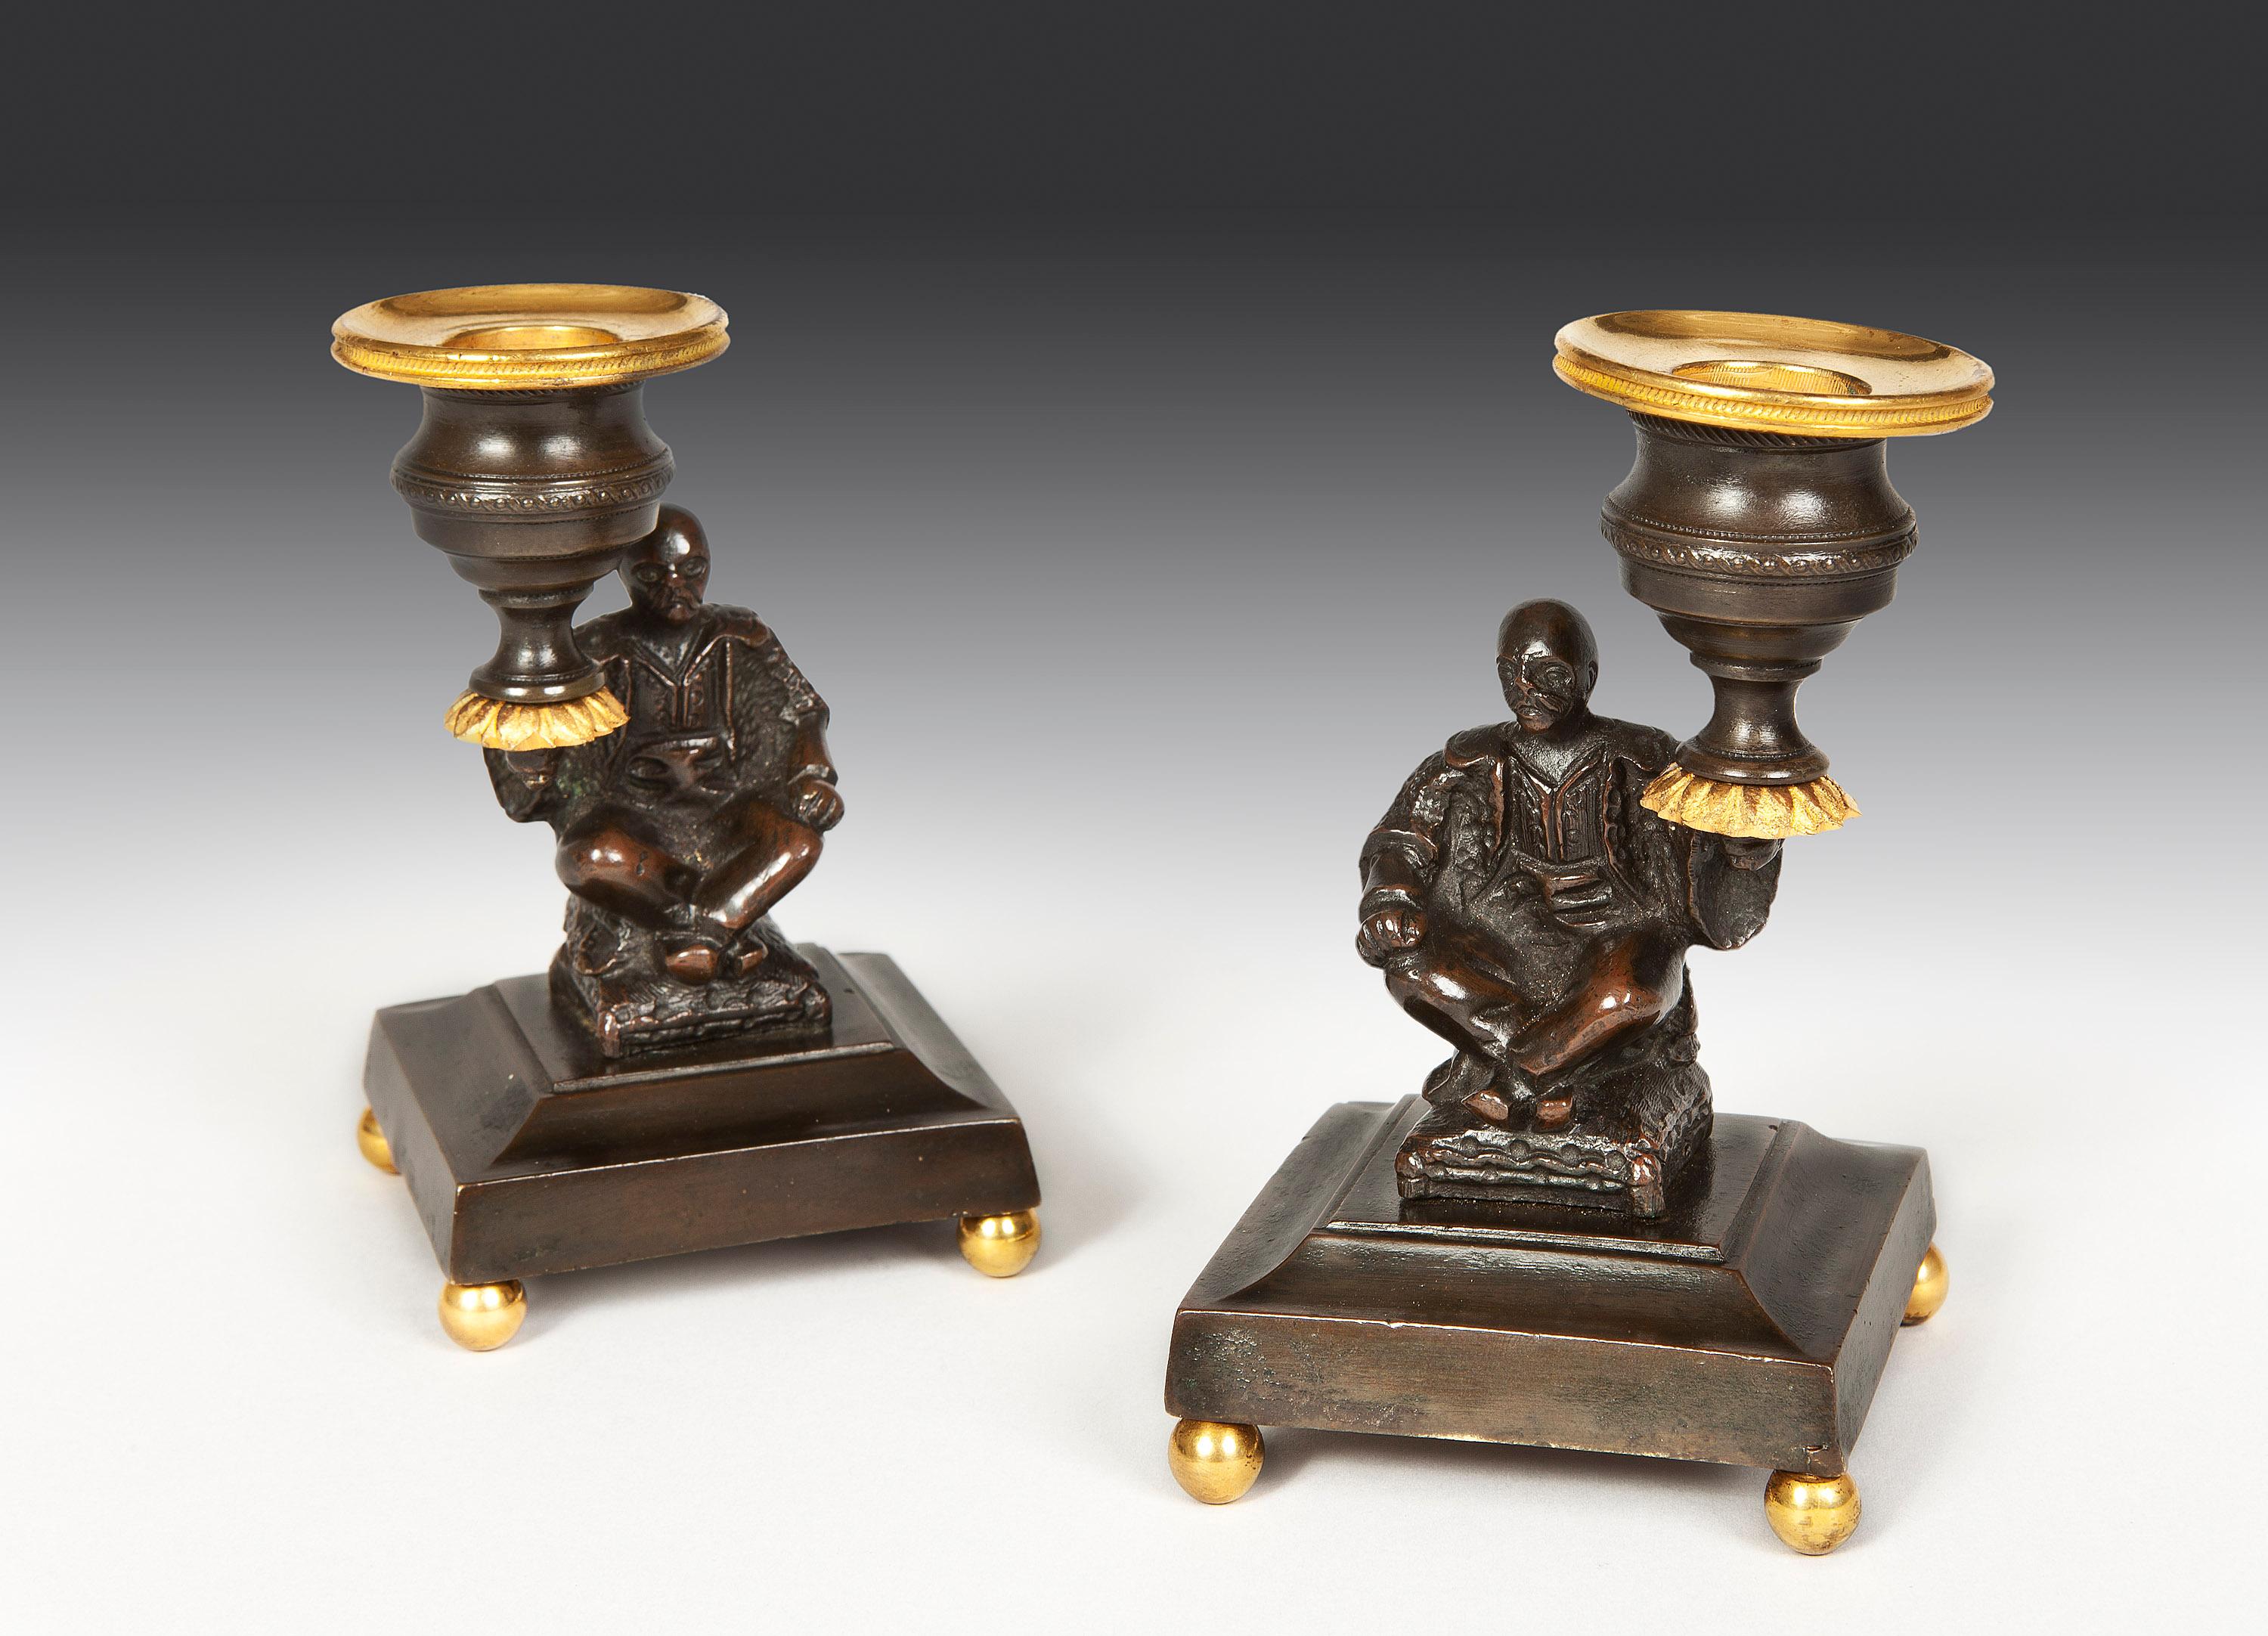 Each candlestick has a bronze Chinaman sitting cross-legged on a fusion holding a candle branch aloft.